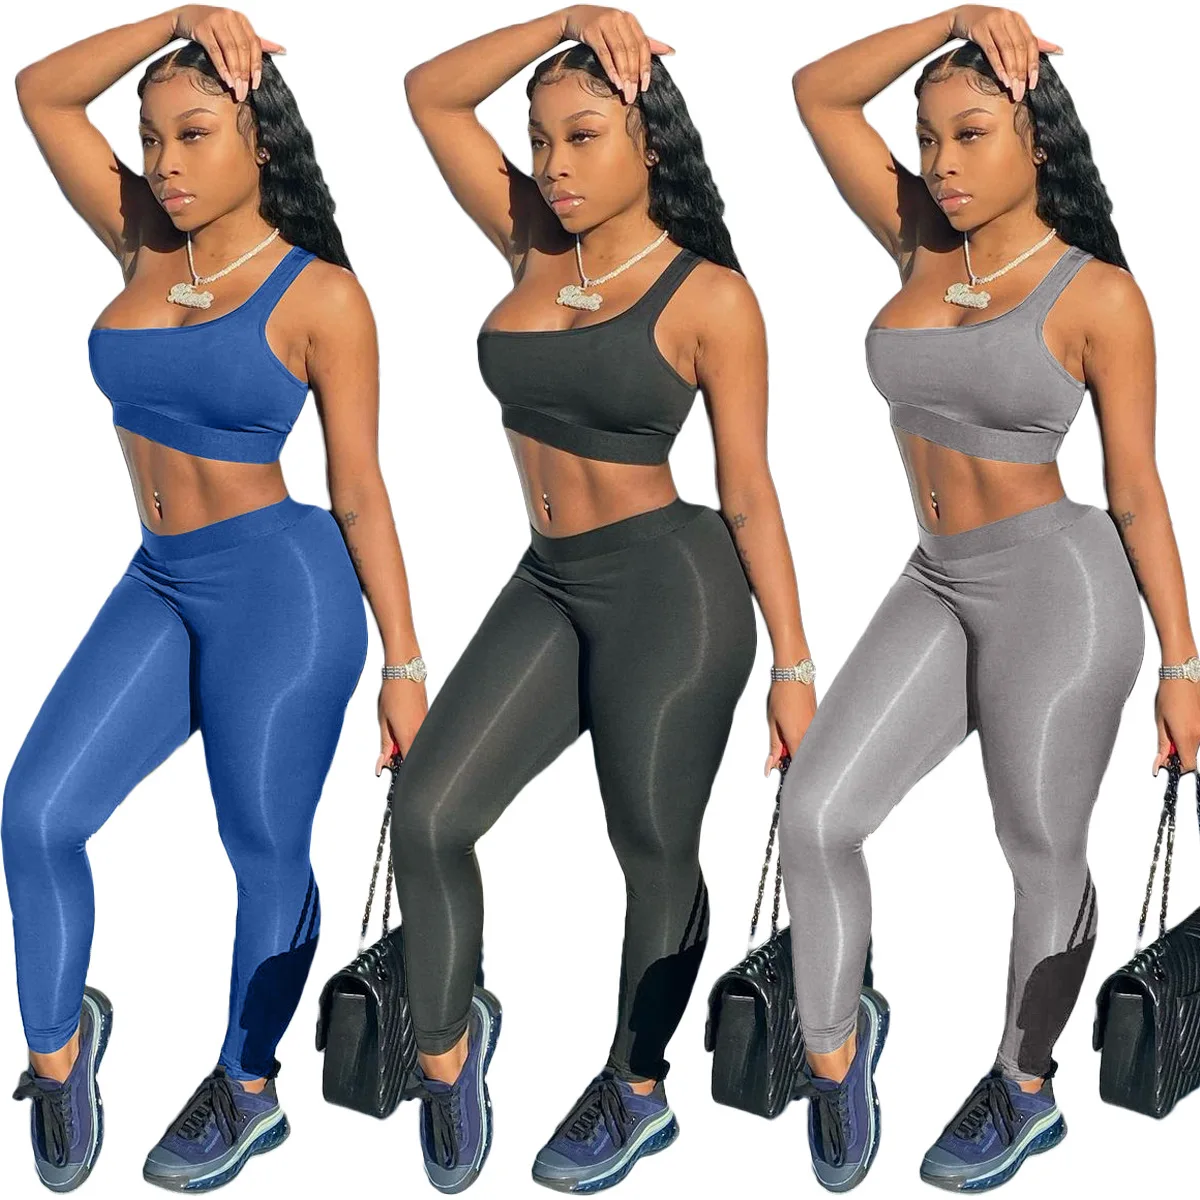 

Xuqing 2021 Wholesale fashion ones shoulder tank top two piece pants yoga set jogger outfits for women, Photo shows